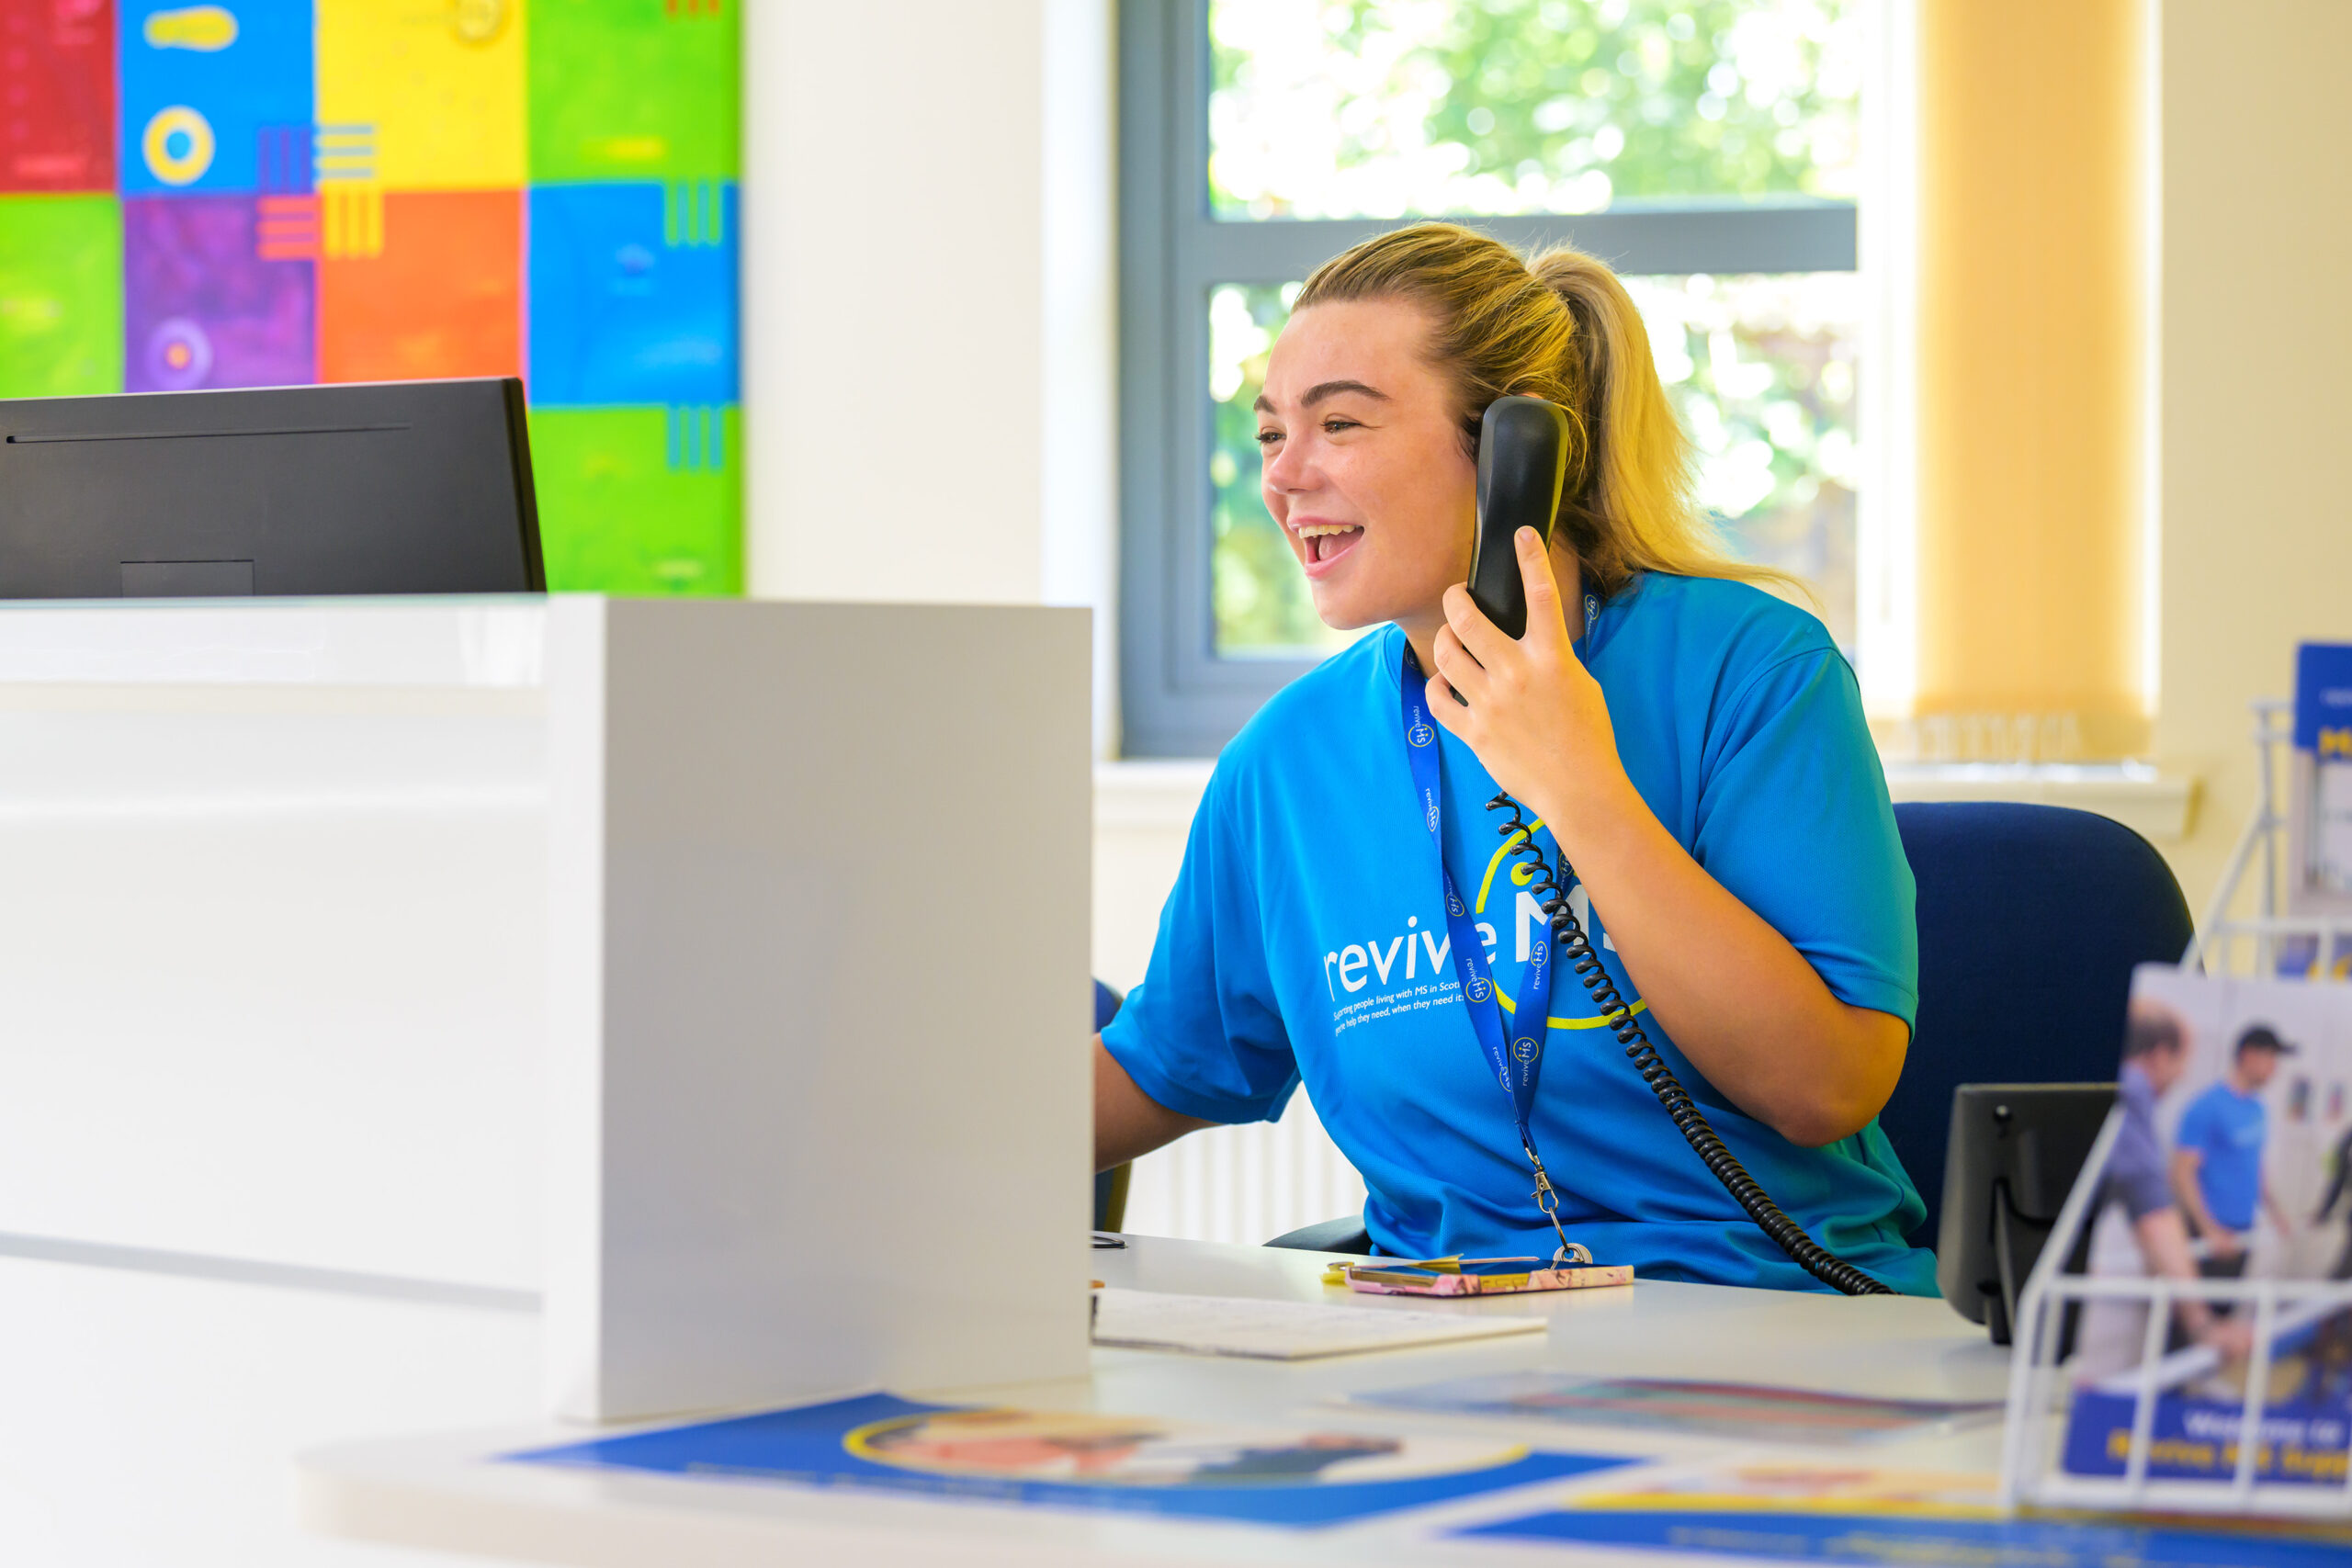 A young woman with long blonde hair is talking on the phone and smiling. She wears a bright blue t-shirt with the Revive logo on it.